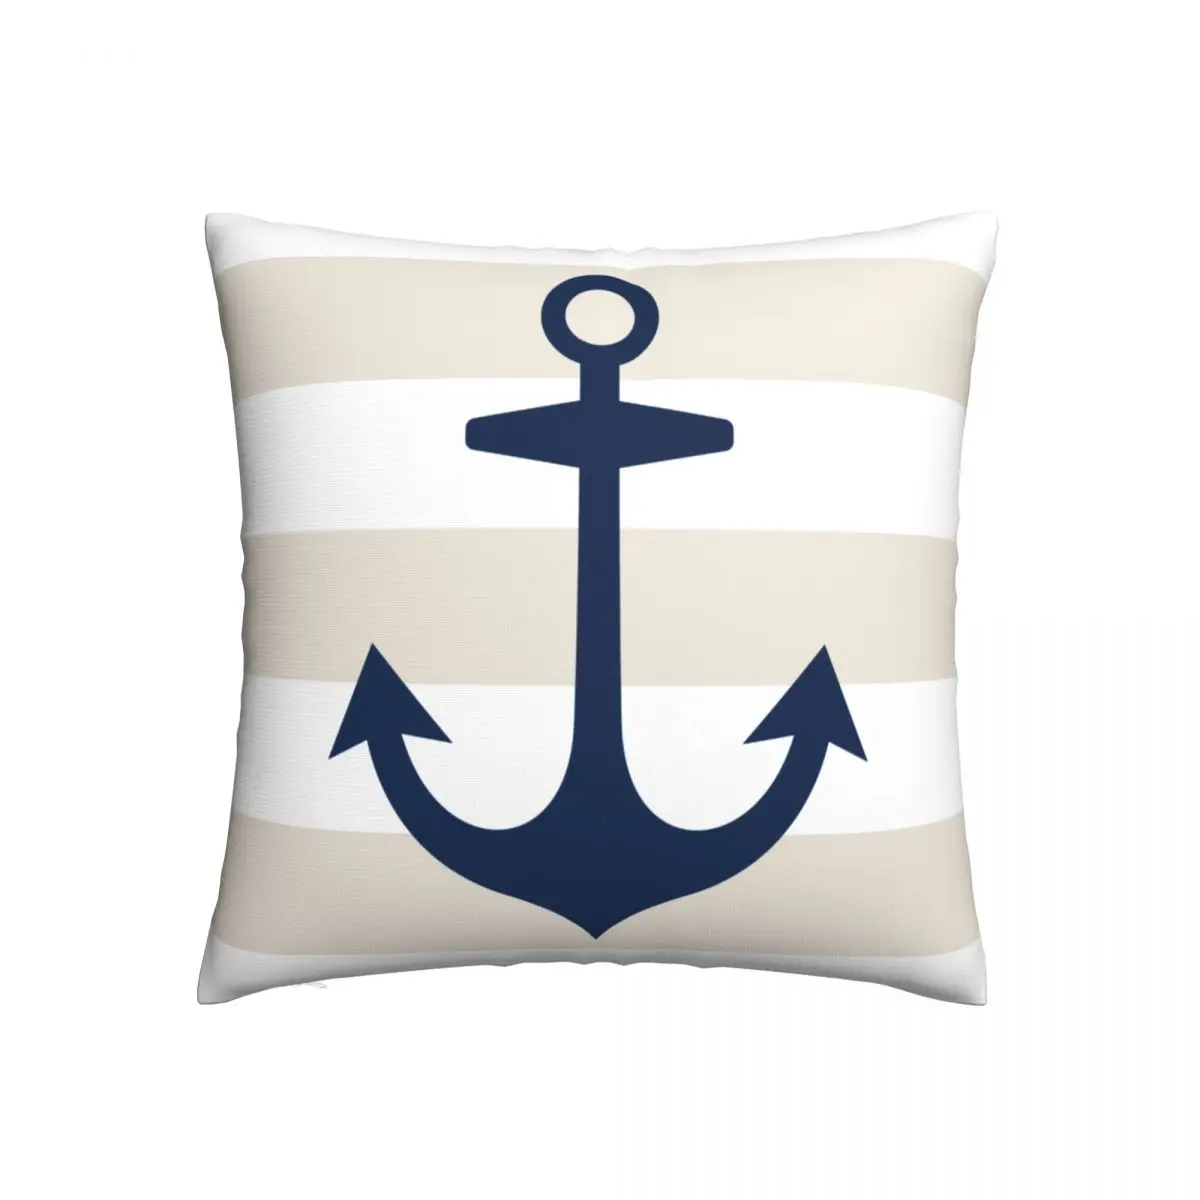 

Nautical Navy Blue Anchor With Beige Stripes Pillowcase Polyester Printed Zipper Decor Pillow Case for Bed Cushion Cover 45x45